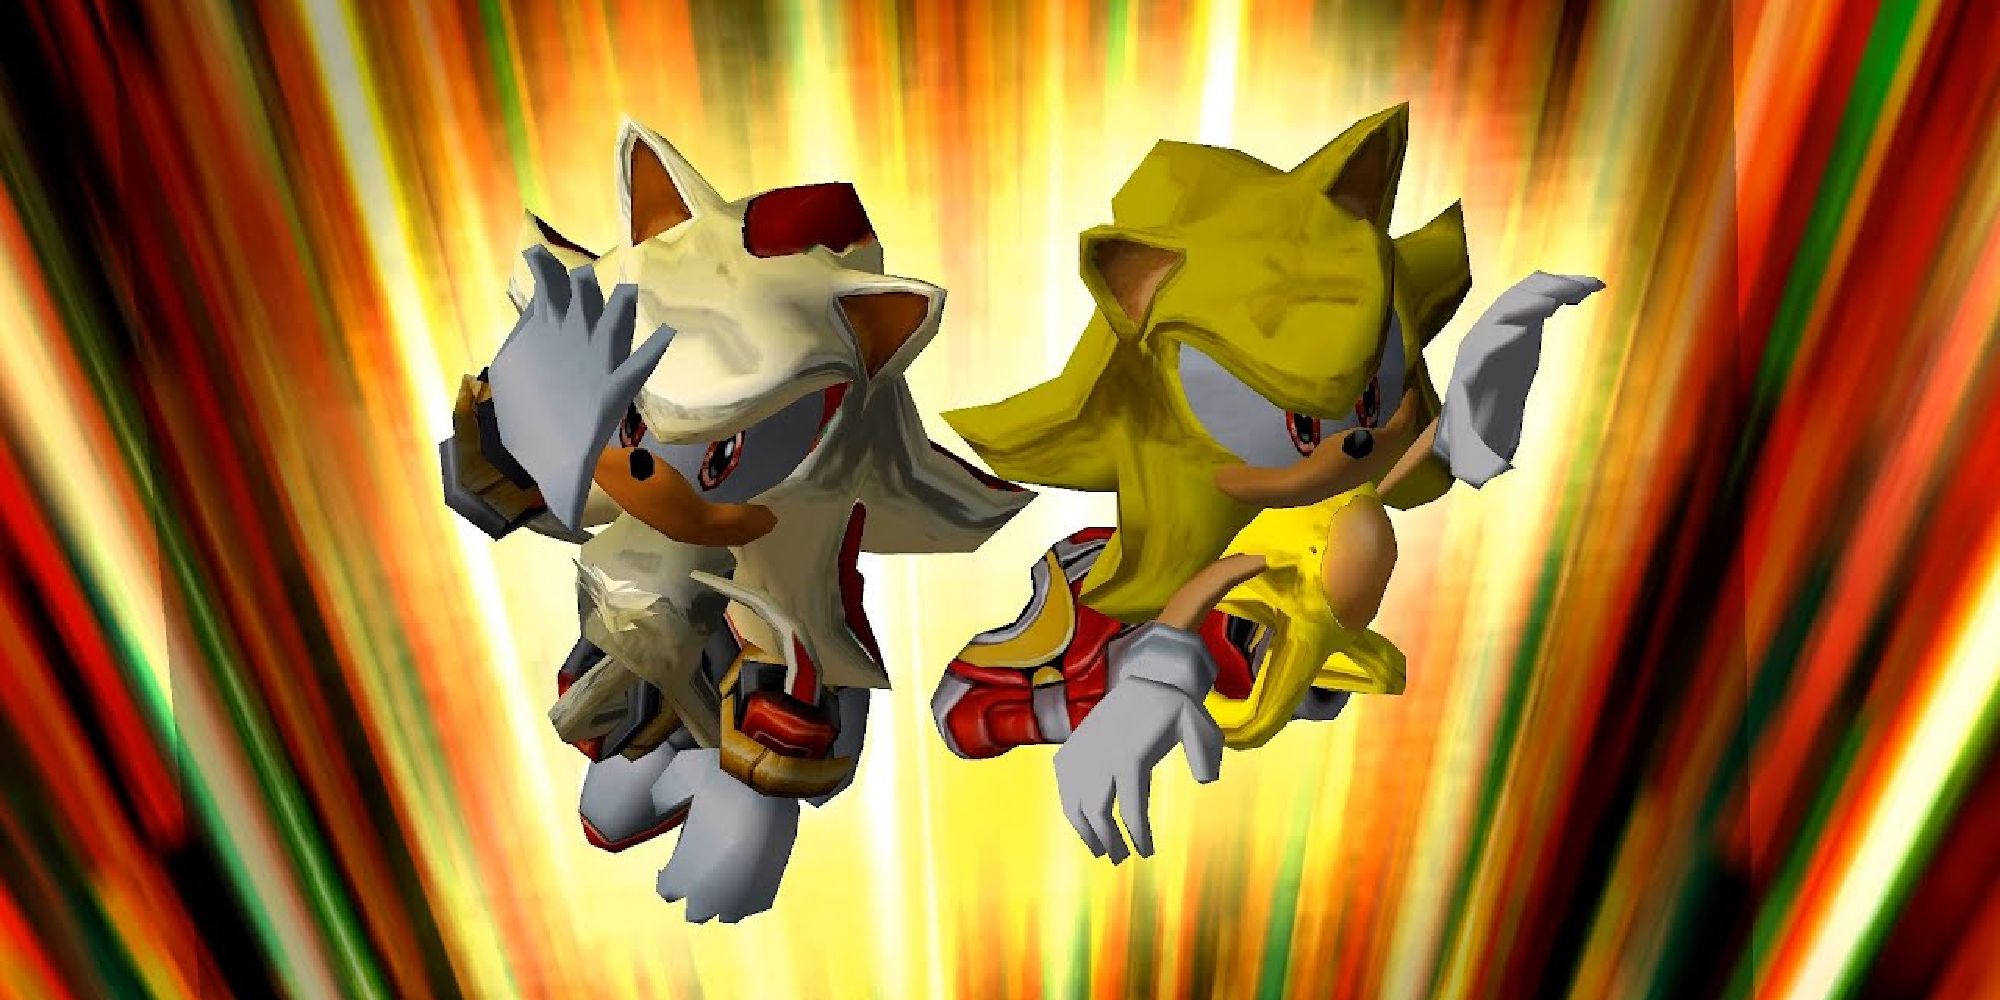 Shadow and Sonic team up as Super Shadow and Super Sonic in SA2